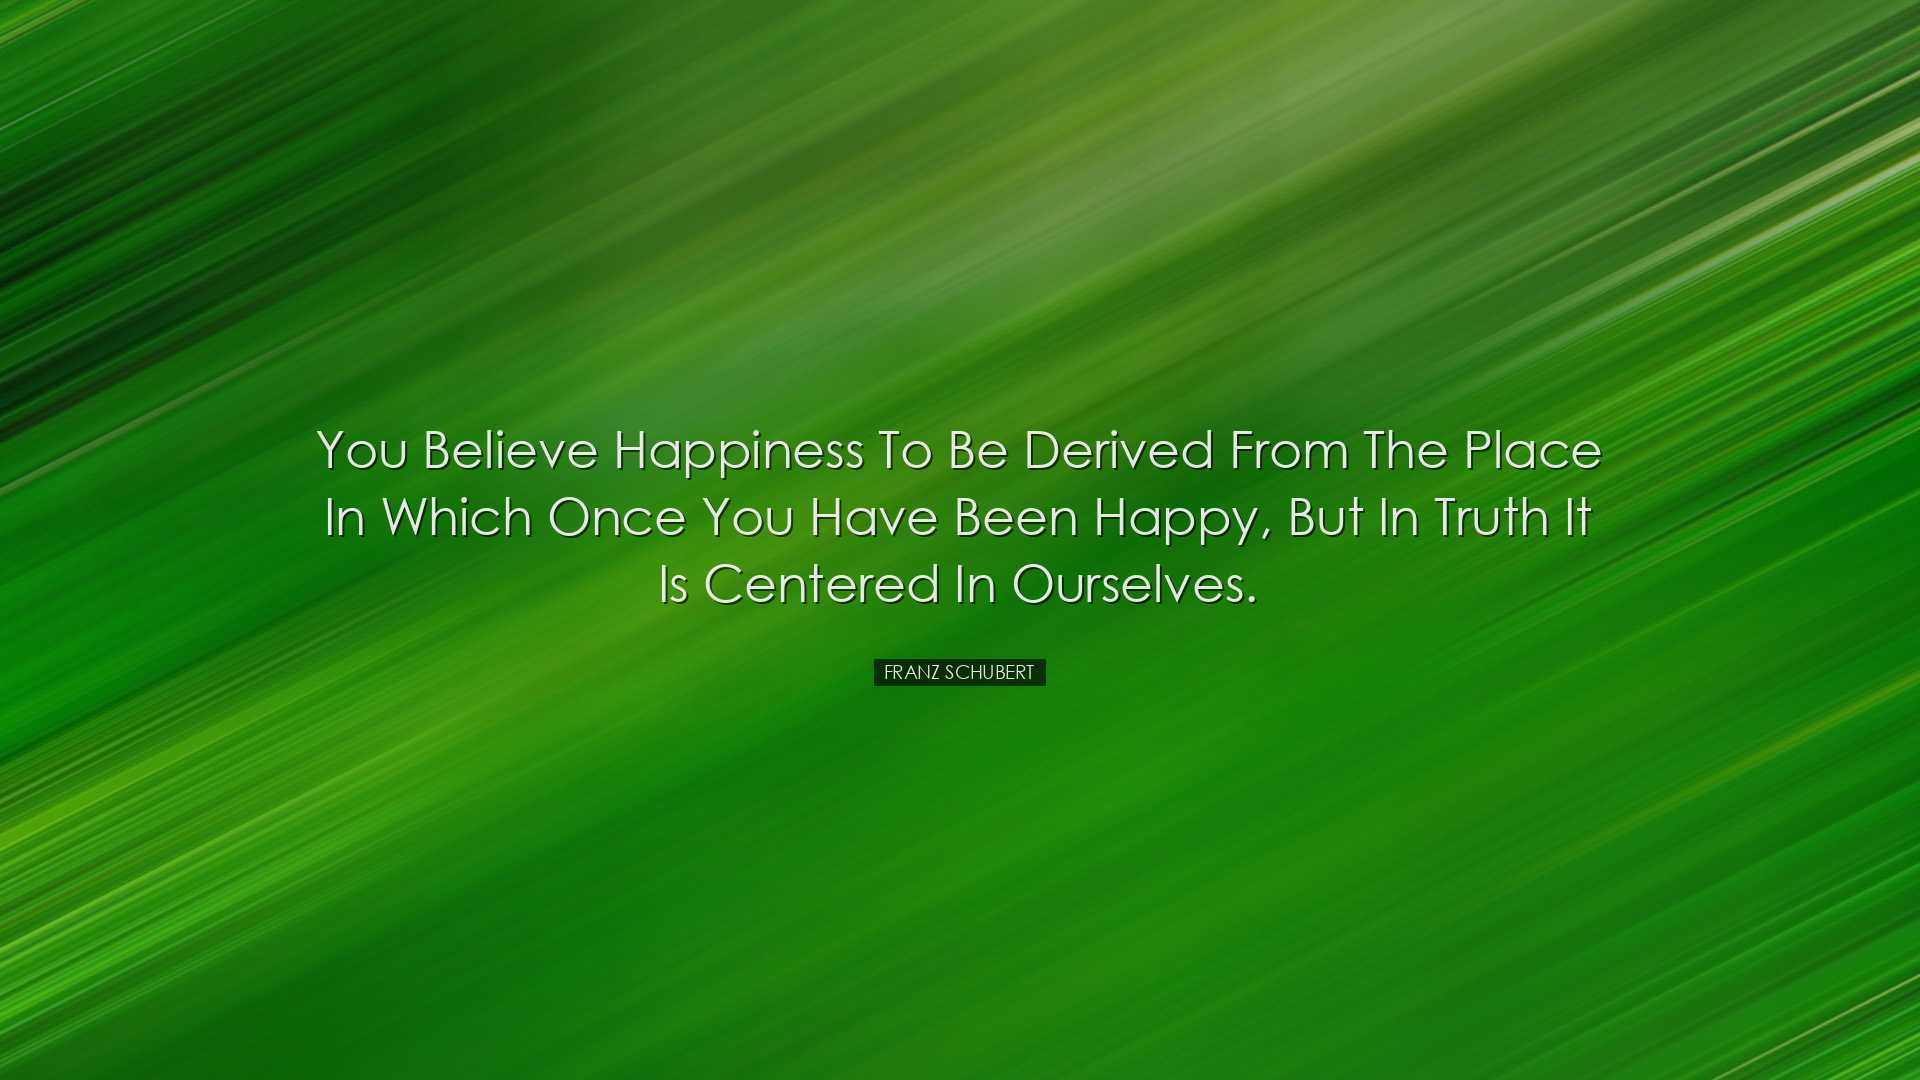 You believe happiness to be derived from the place in which once y